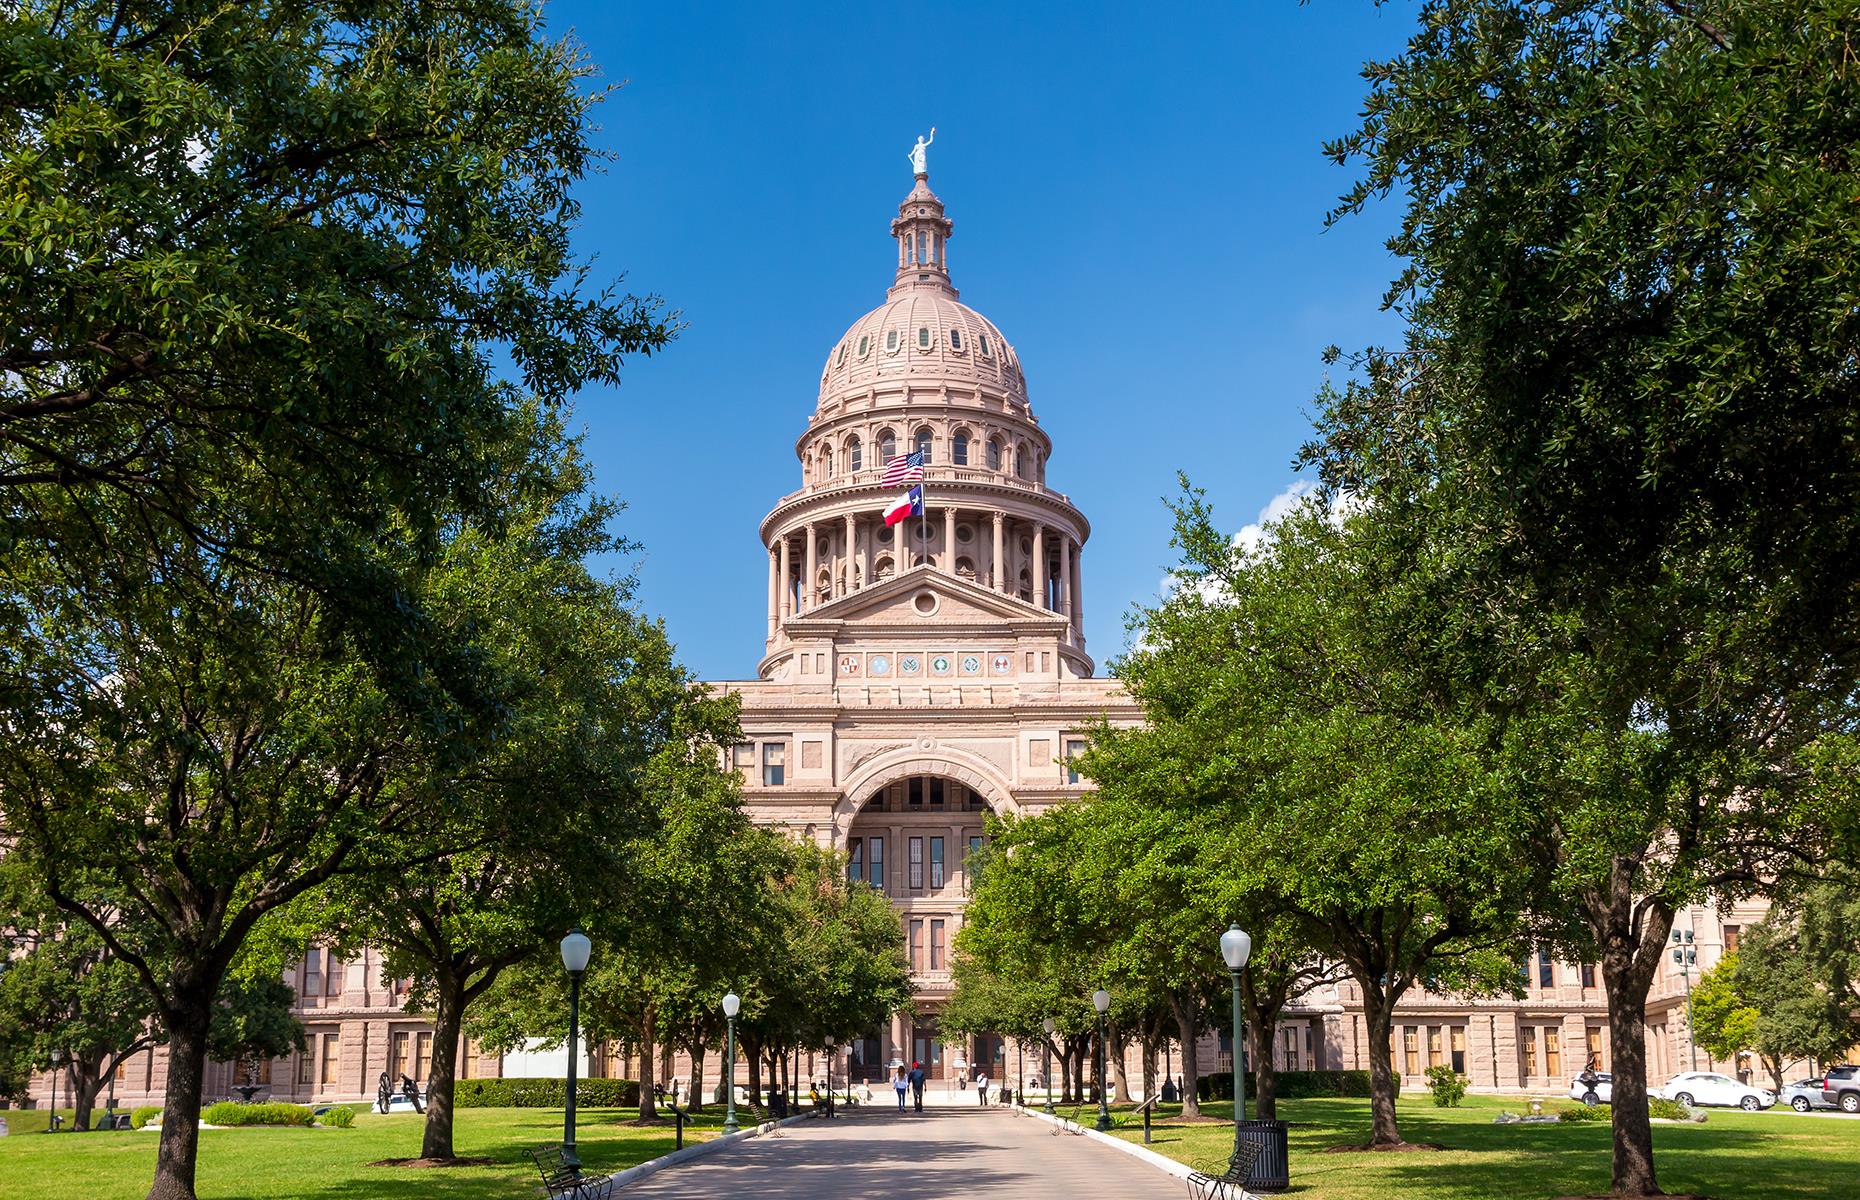 <p>In true Texan style, everything is just a little oversized in the grand domed state capitol, liberally emblazoned with Lone Star motifs and standing 14 feet (4m) taller than its DC counterpart. The building is open for <a href="https://tspb.texas.gov/plan/tours/tours.html#selfguided">self-guided tours</a> five days a week and it provides a whistlestop introduction to Texan history. The colossal capitol building is one of the city's grandest landmarks and its leafy grounds are especially nice for a leisurely stroll afterwards.</p>